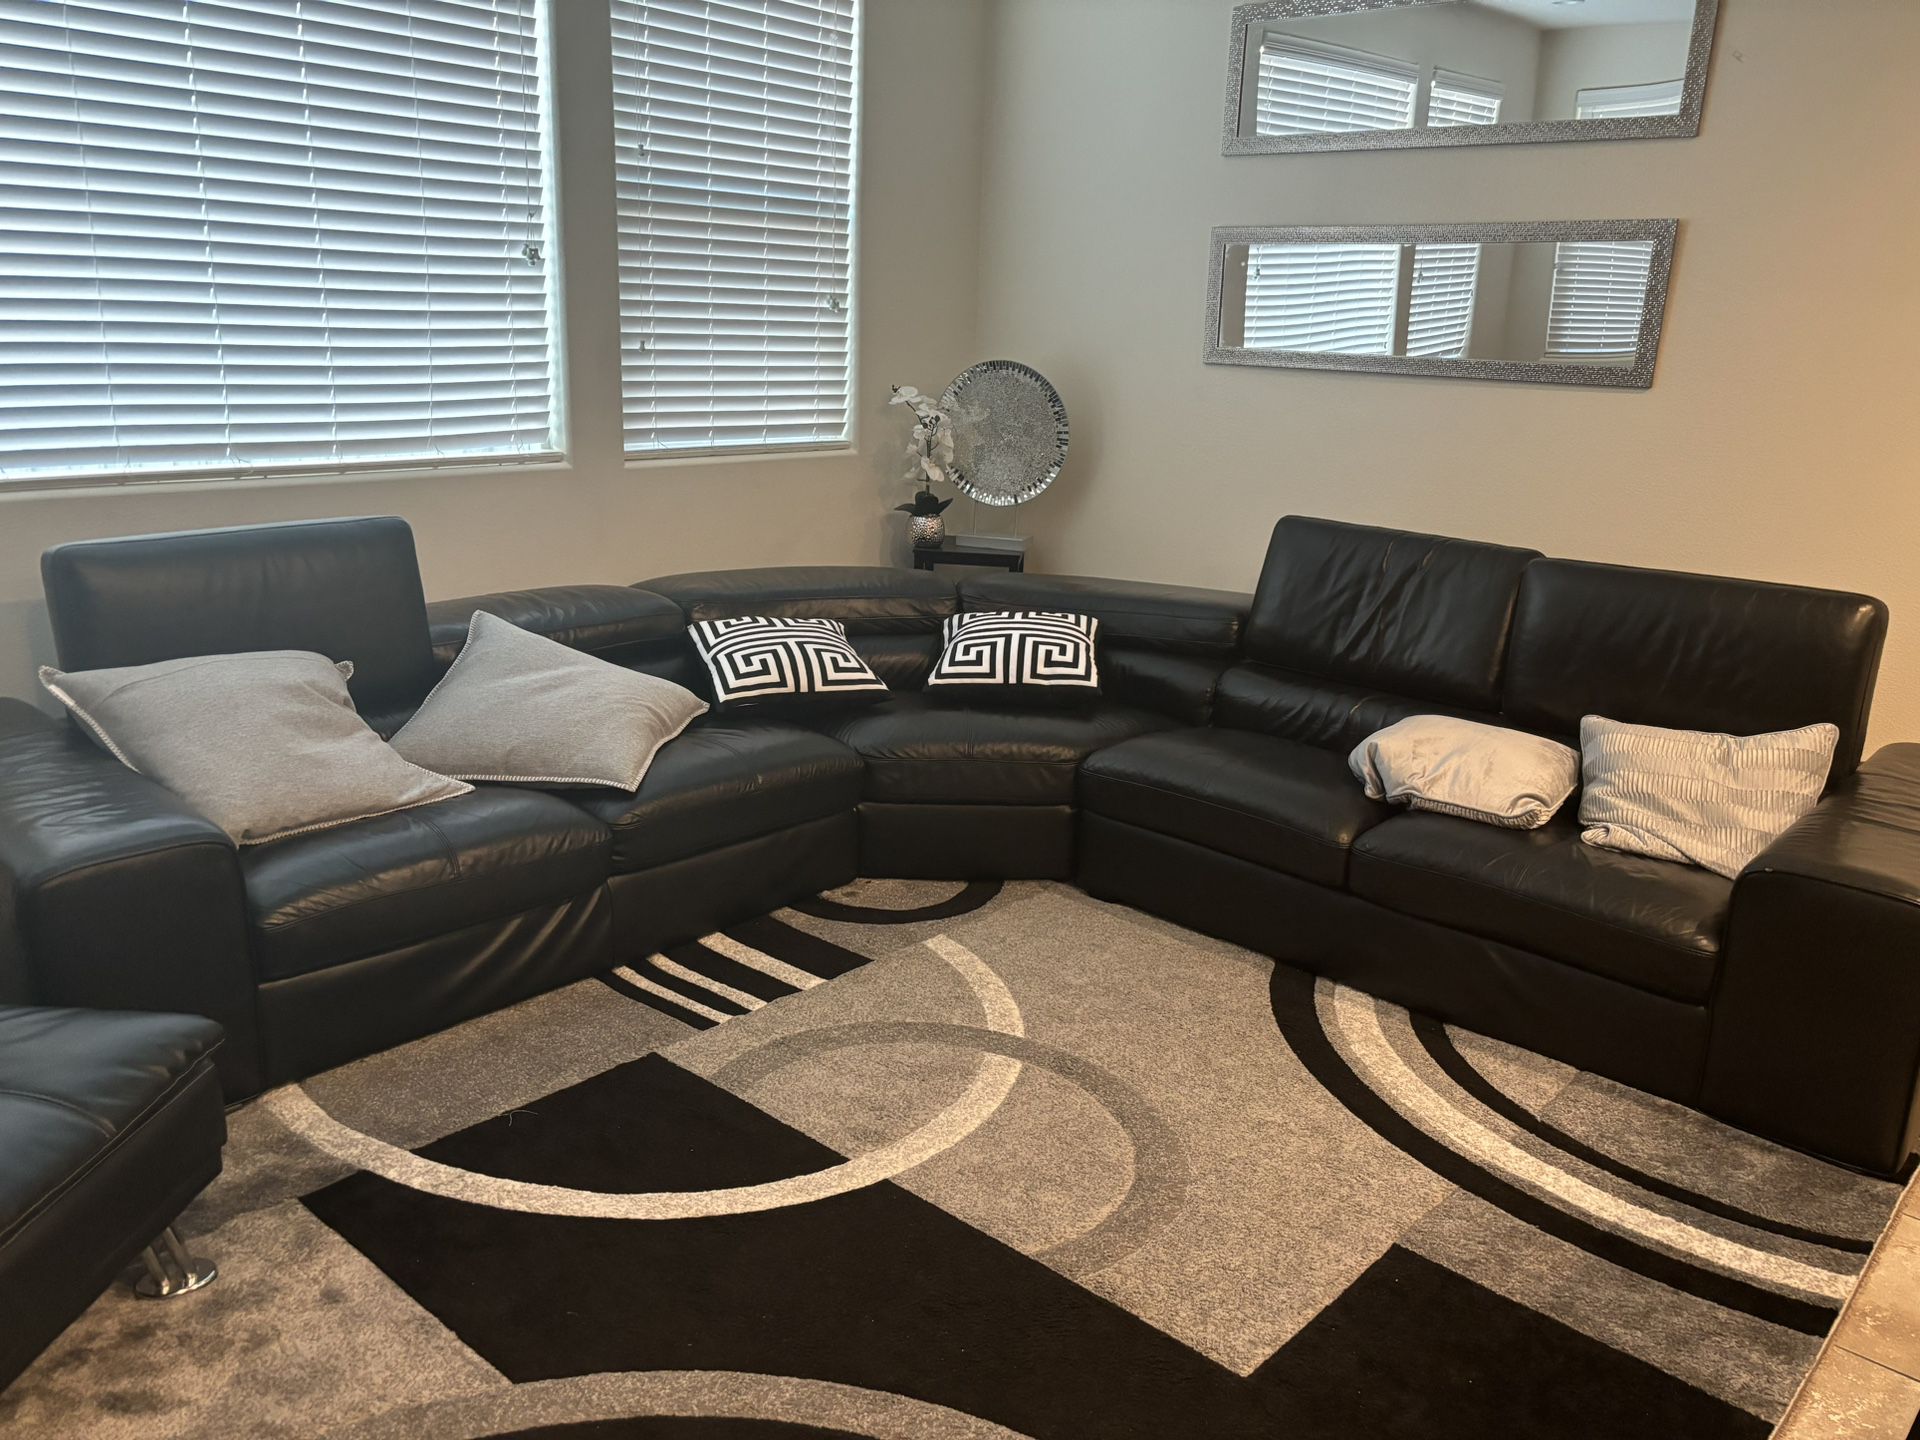 Black Leather Sectional Couches